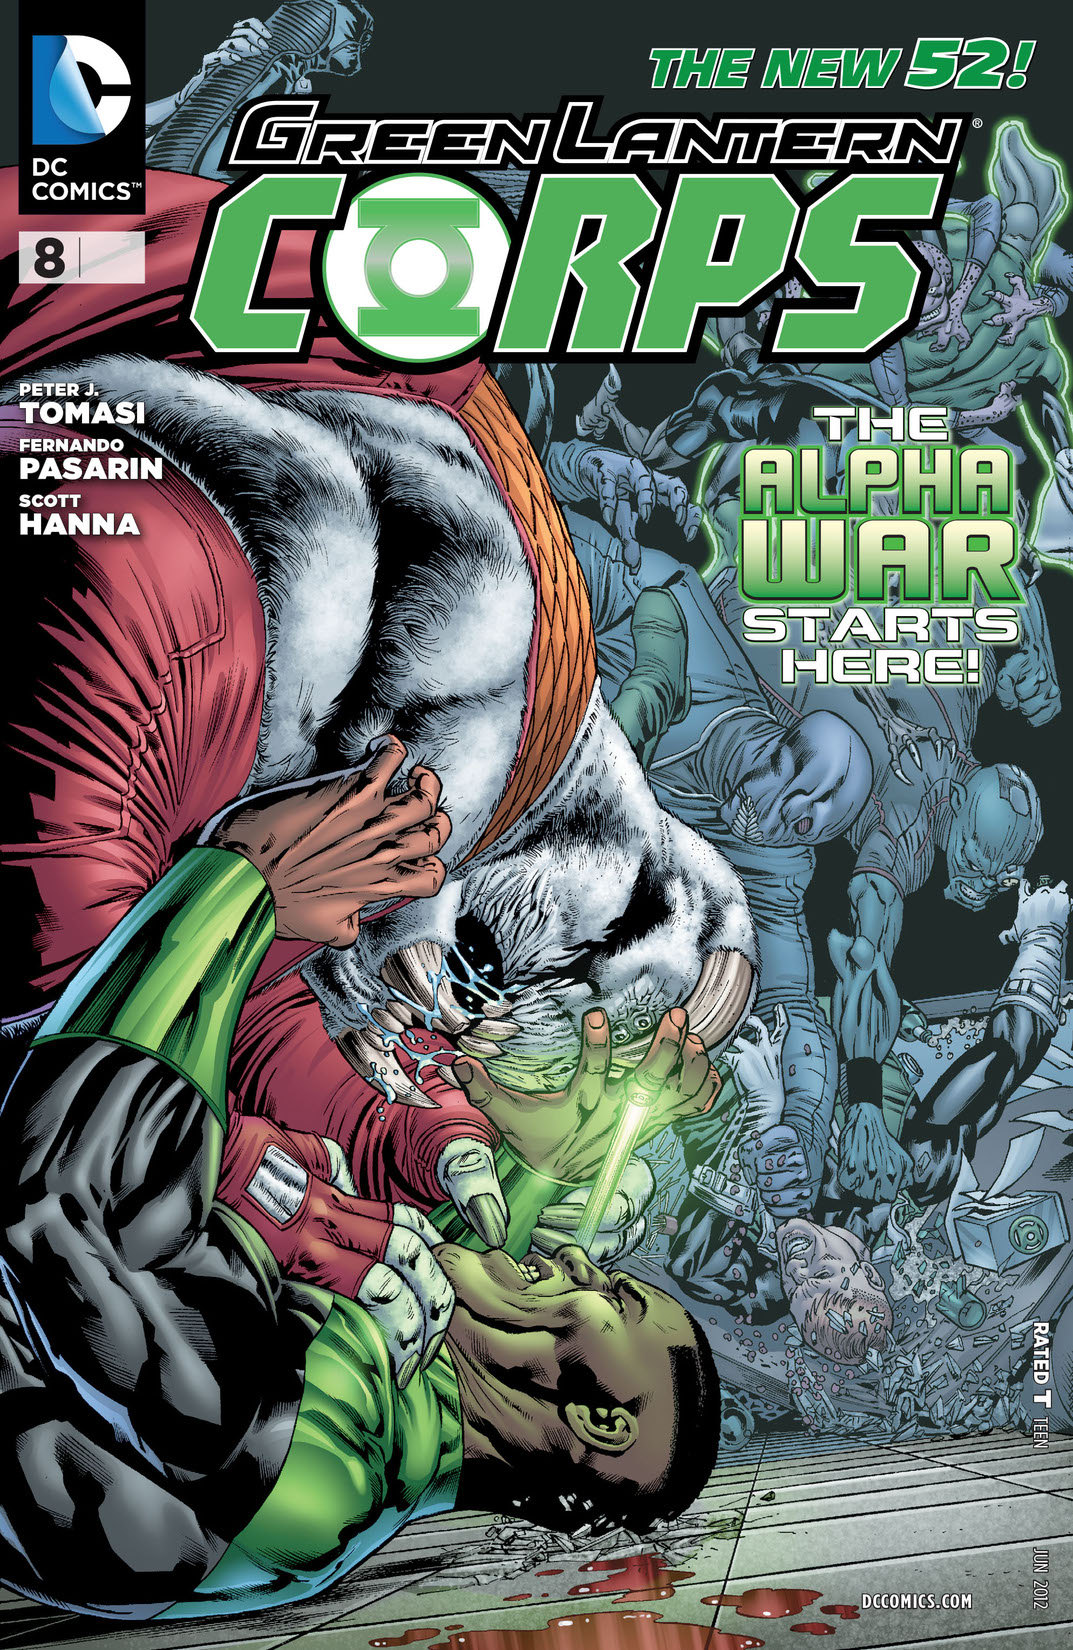 Green Lantern Corps (2011-) #8 preview images